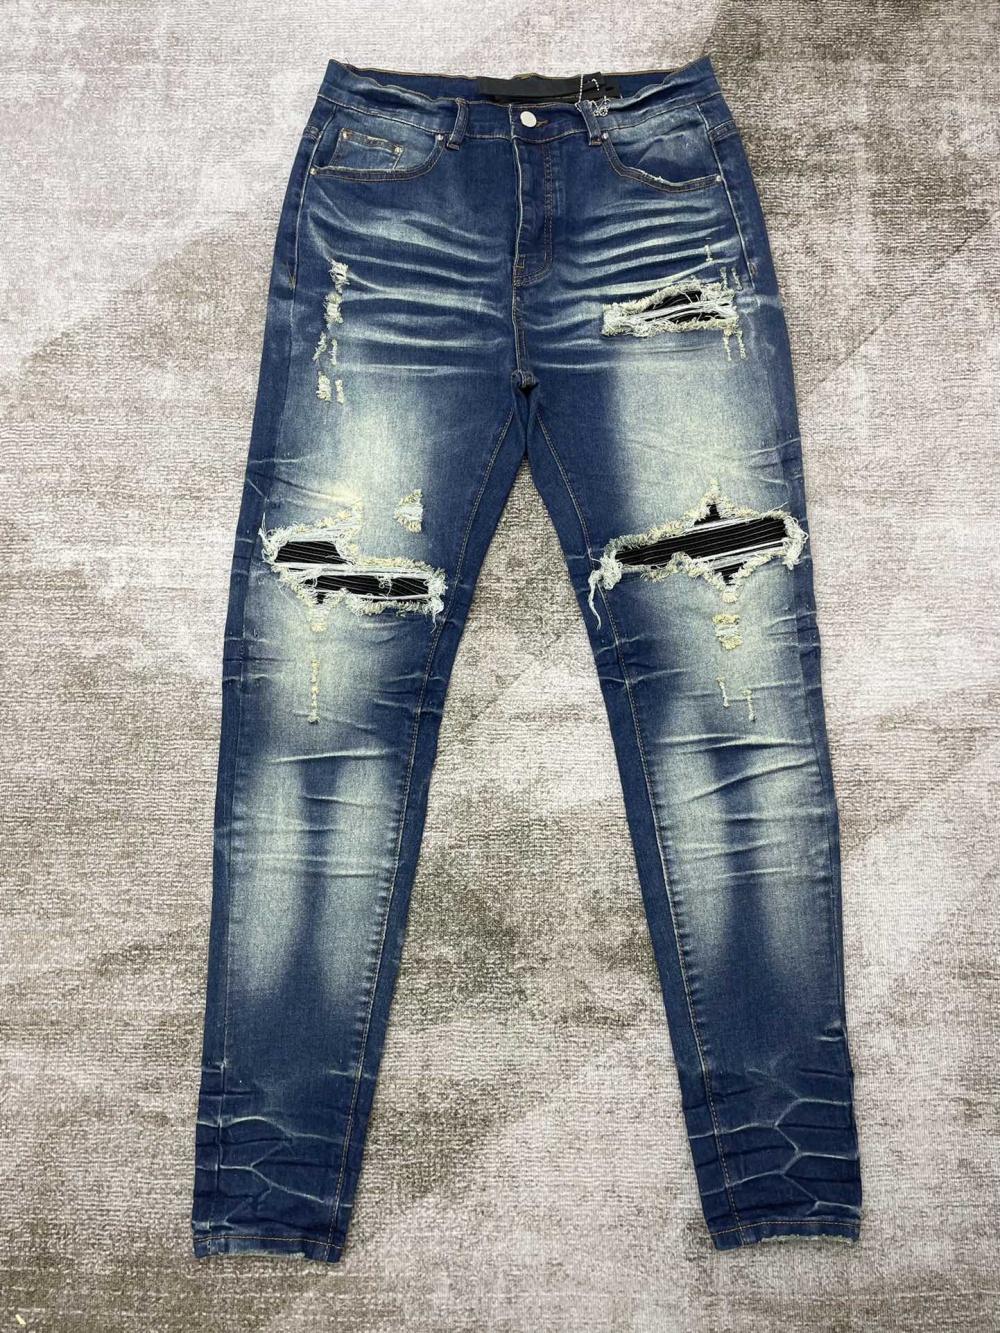 US$ 118.93 - 1:1 quality version Mended jeans - www.repdog.cn